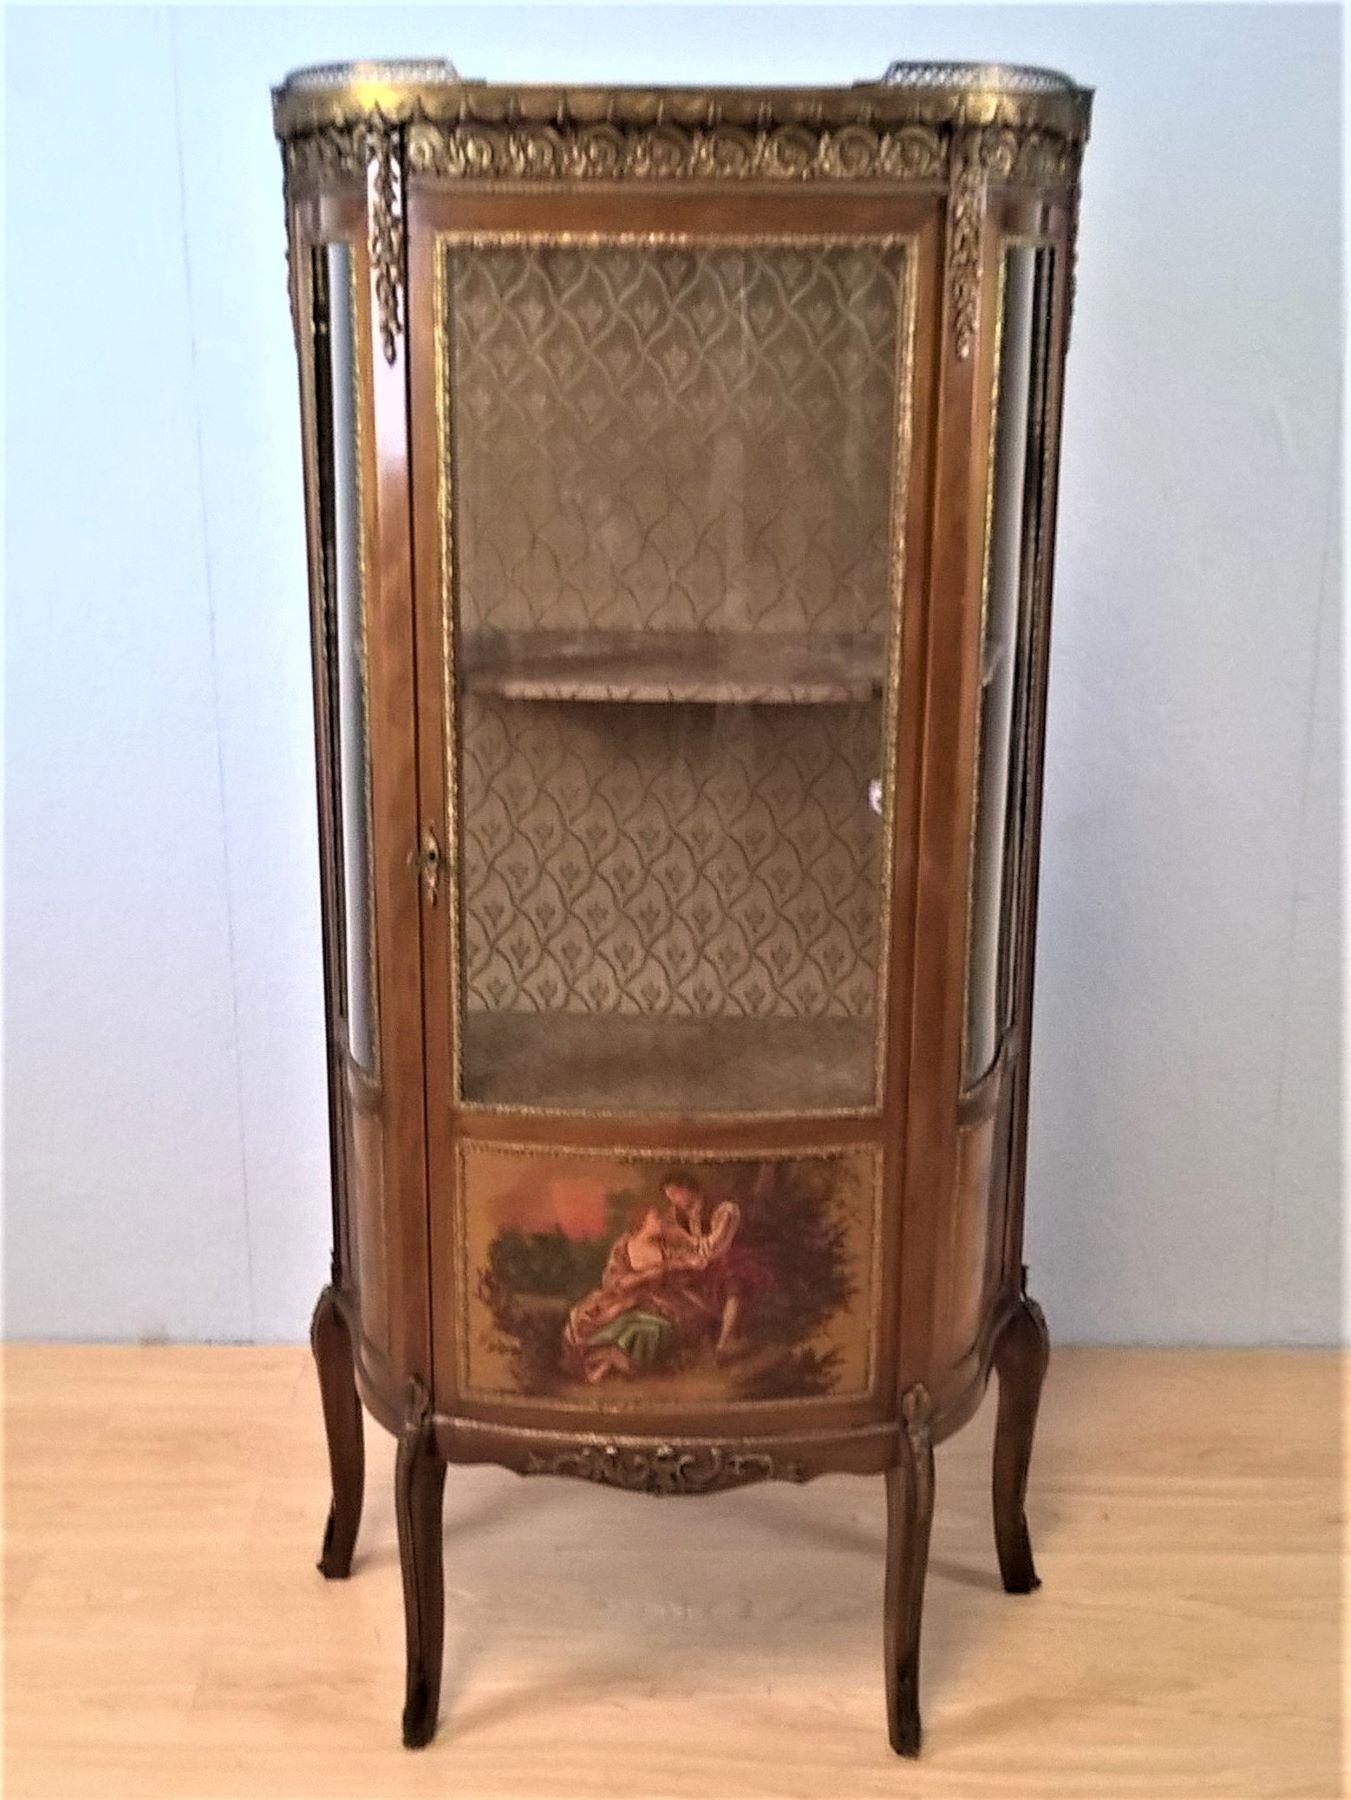 A French Louis XV Revival mahogany vitrine with metal mounts and hand painted scenes
The marble top with a brass gallery decorated with swags and scrolls.
The bow fronted glass door encloses a lined interior with two shelves and a serpentine